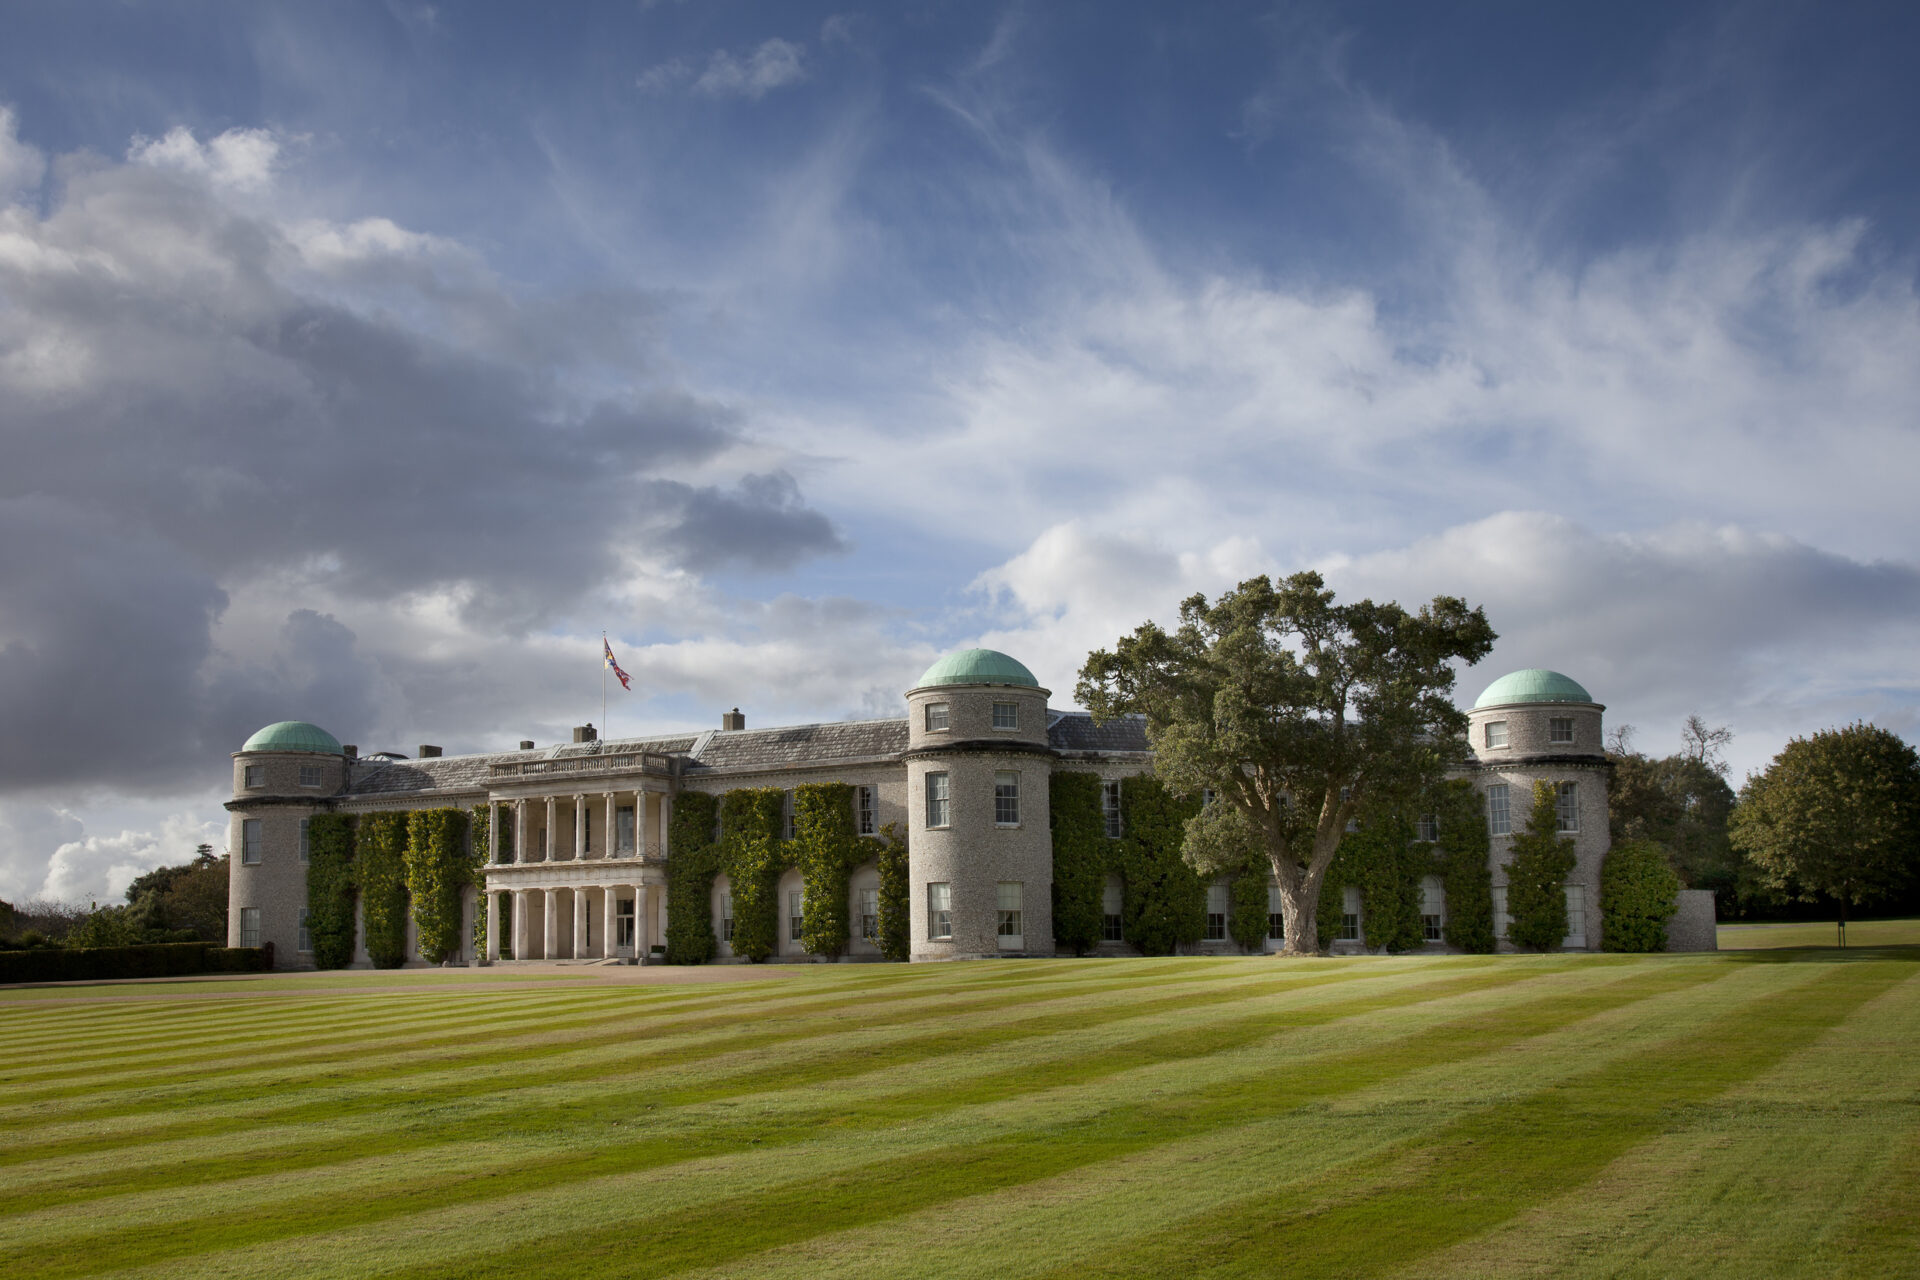 Goodwood House - Photographed by James Fennell 